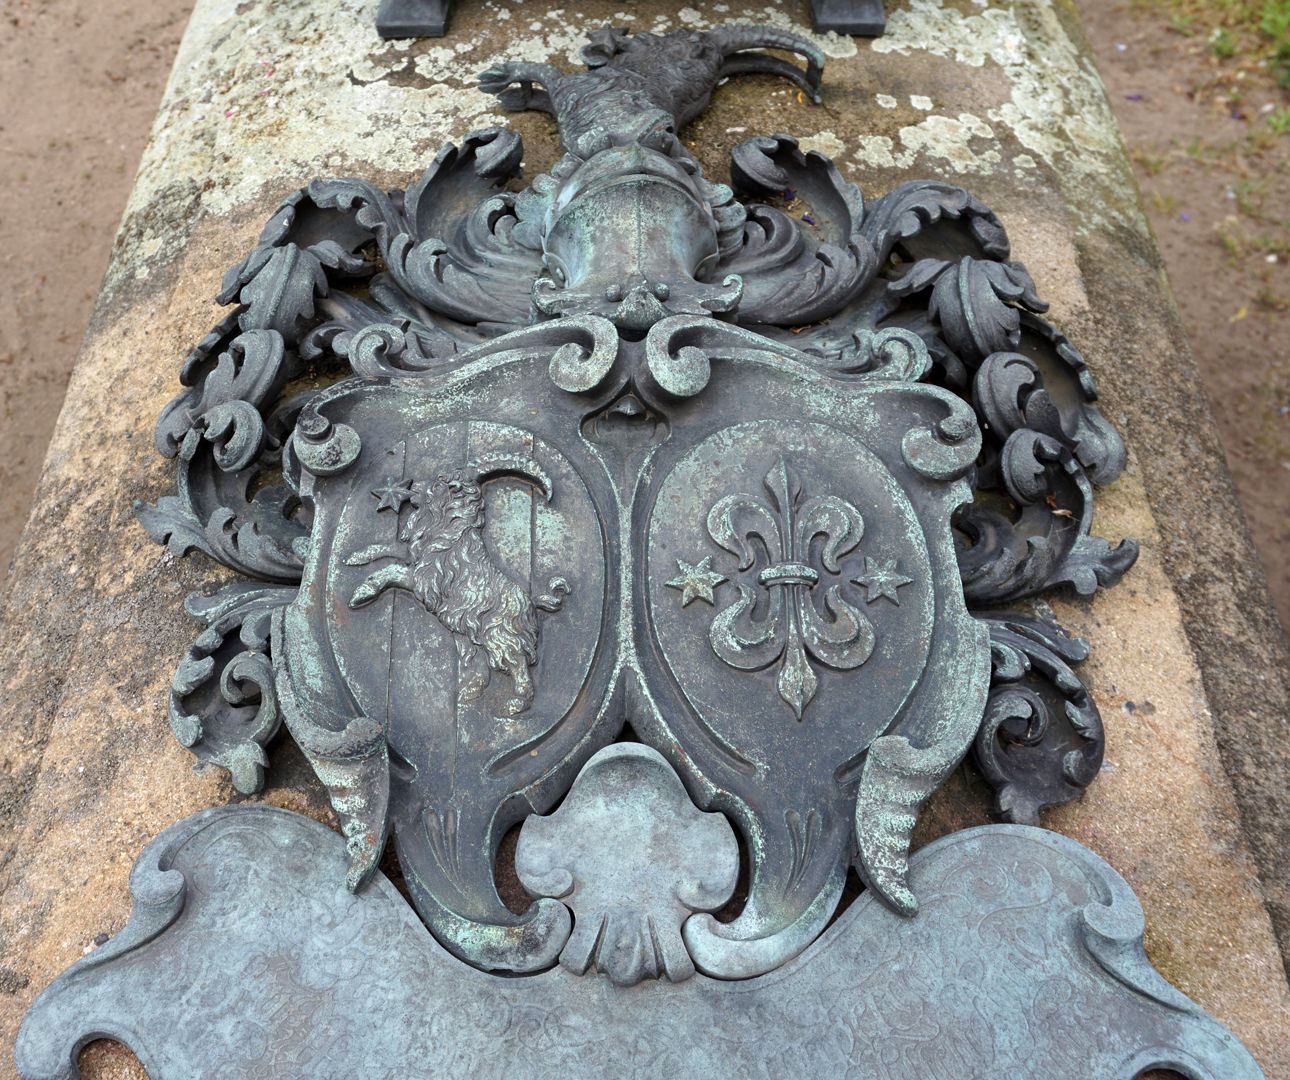 Epitaph of Georg Friederich Nürnberger Detailed view with two coats of arms